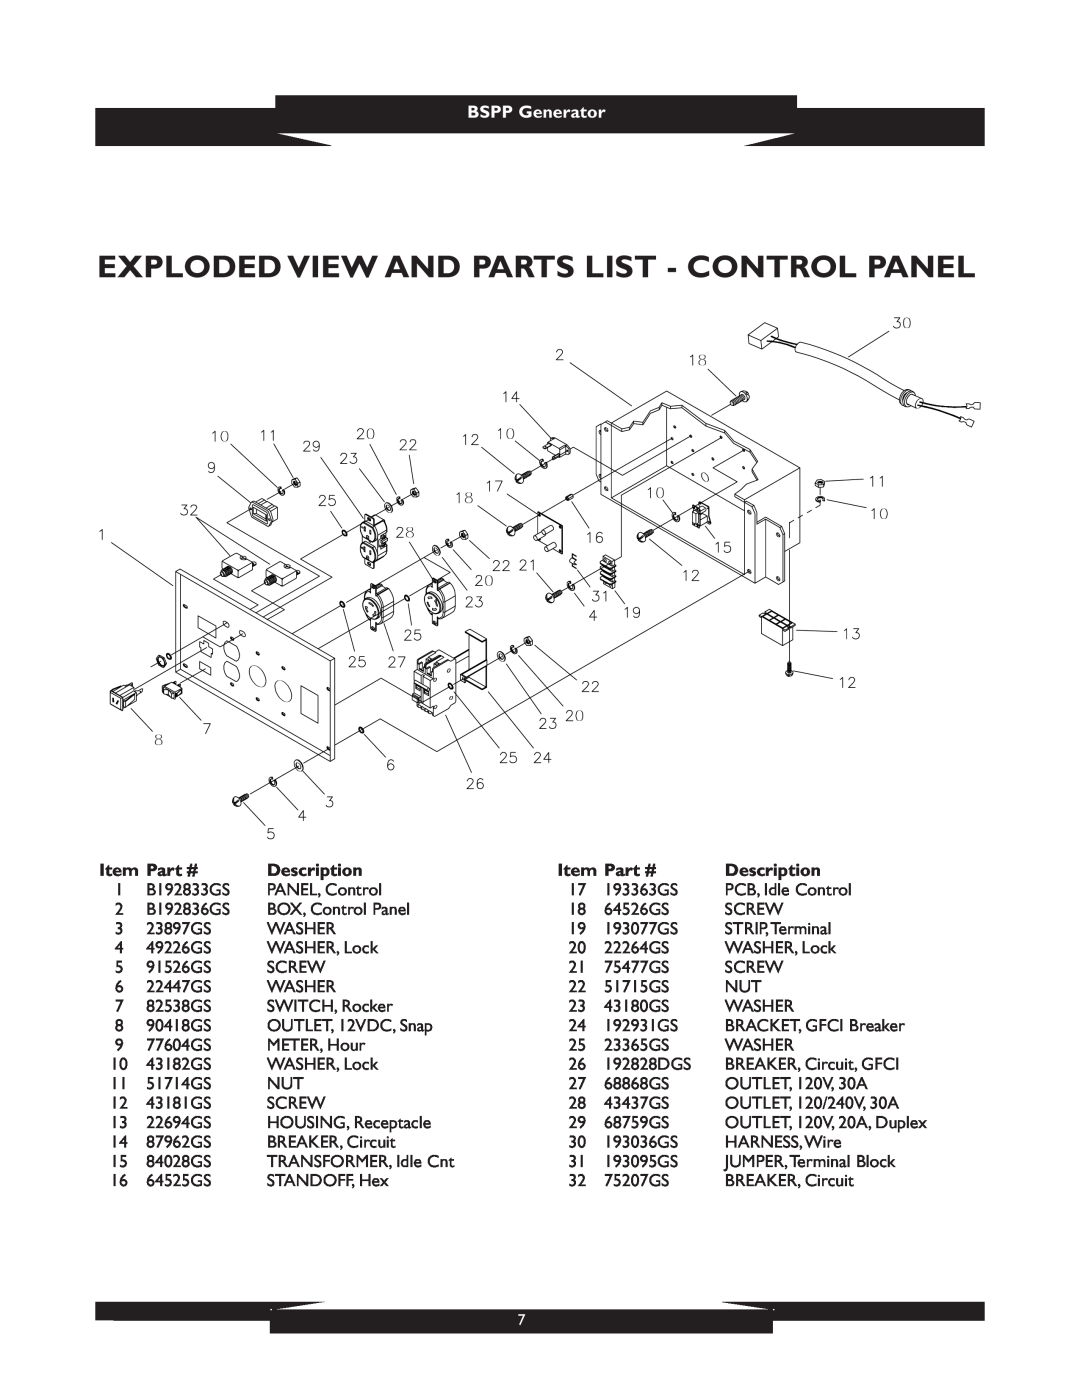 Briggs & Stratton 1933 manual Exploded View And Parts List - Control Panel, BSPP Generator, Description 